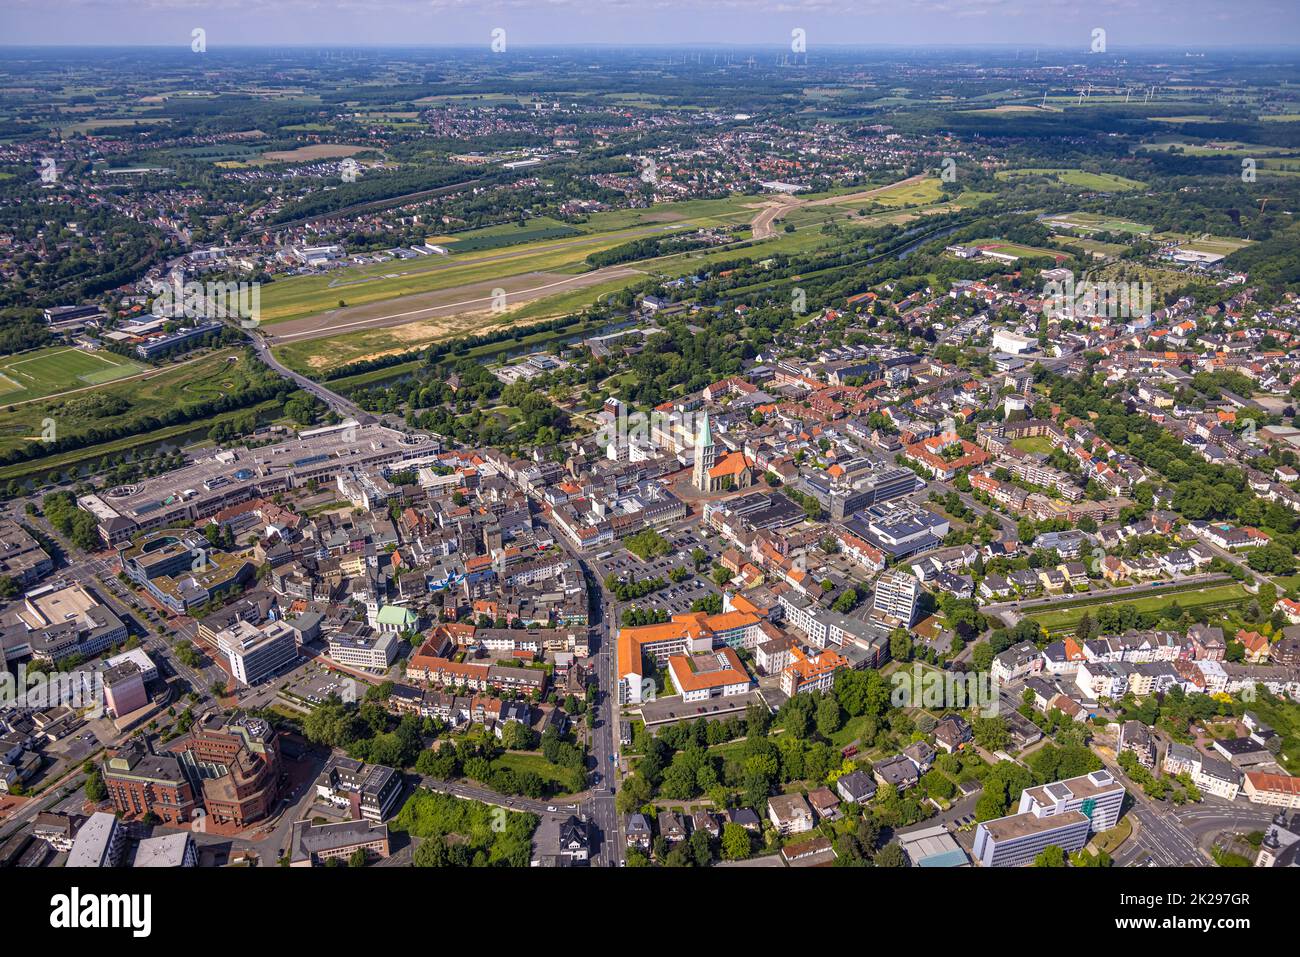 Aerial view, water sports center at Adenauerallee as well as visual axis with Nordringpark and evang. Pauluskirche, Allee-Center, Mitte, Hamm, Ruhrgeb Stock Photo